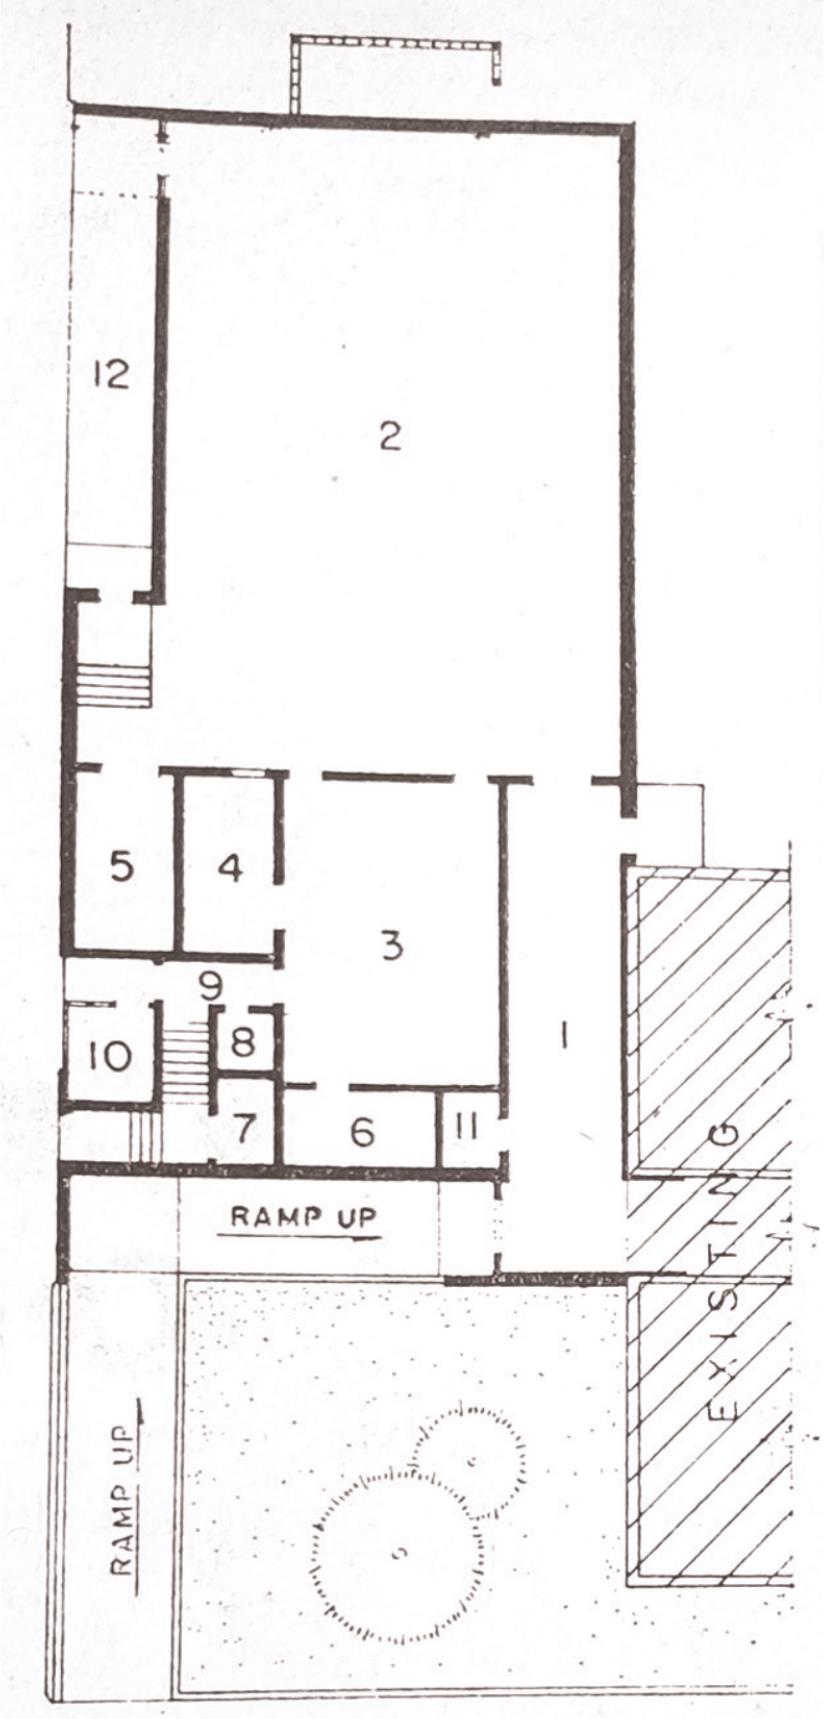 Pictured left is the floor plans for the rebuilding of the Weatherford High School cafeteria, which was damaged during the fire which also destroyed the WHS gymnasium. Areas marked by number are: 1 — Corridor 2 — Cafeteria 3 — Kitchen 4 — Dishwashing 5 — Table storage 6 — Food storage 7 — Mechanical 8 — Toilet 9 — Hall 10 — Garbage 11 — Janitor 12 — Bus dock